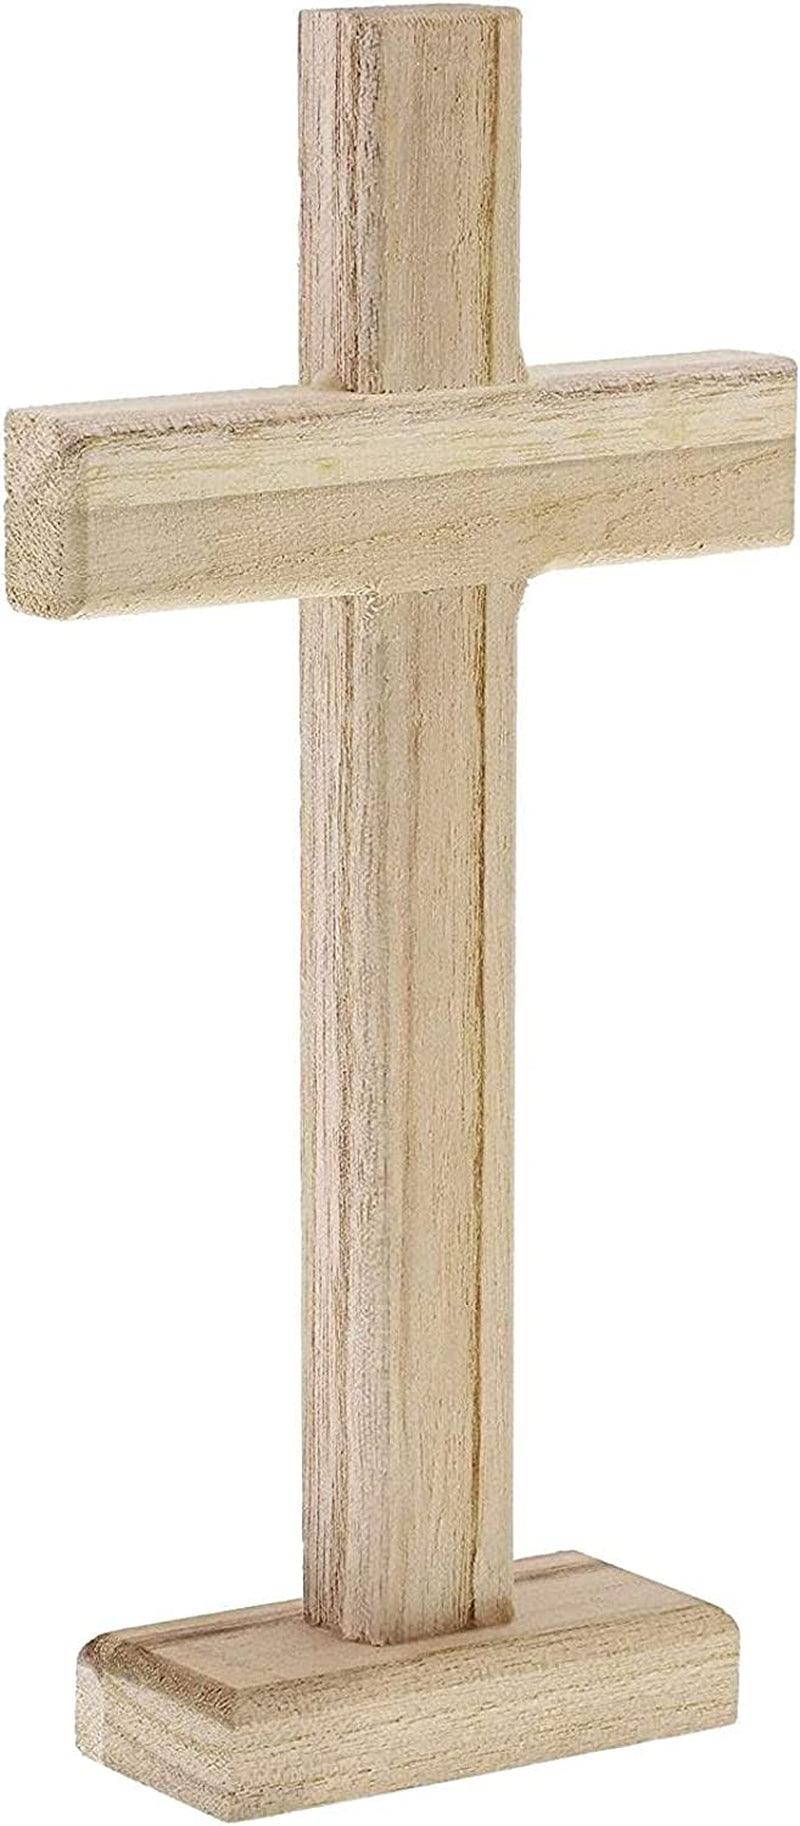 Wood Crosses for Crafts, Wooden Cross (8.7 in, 3-Pack), PACK